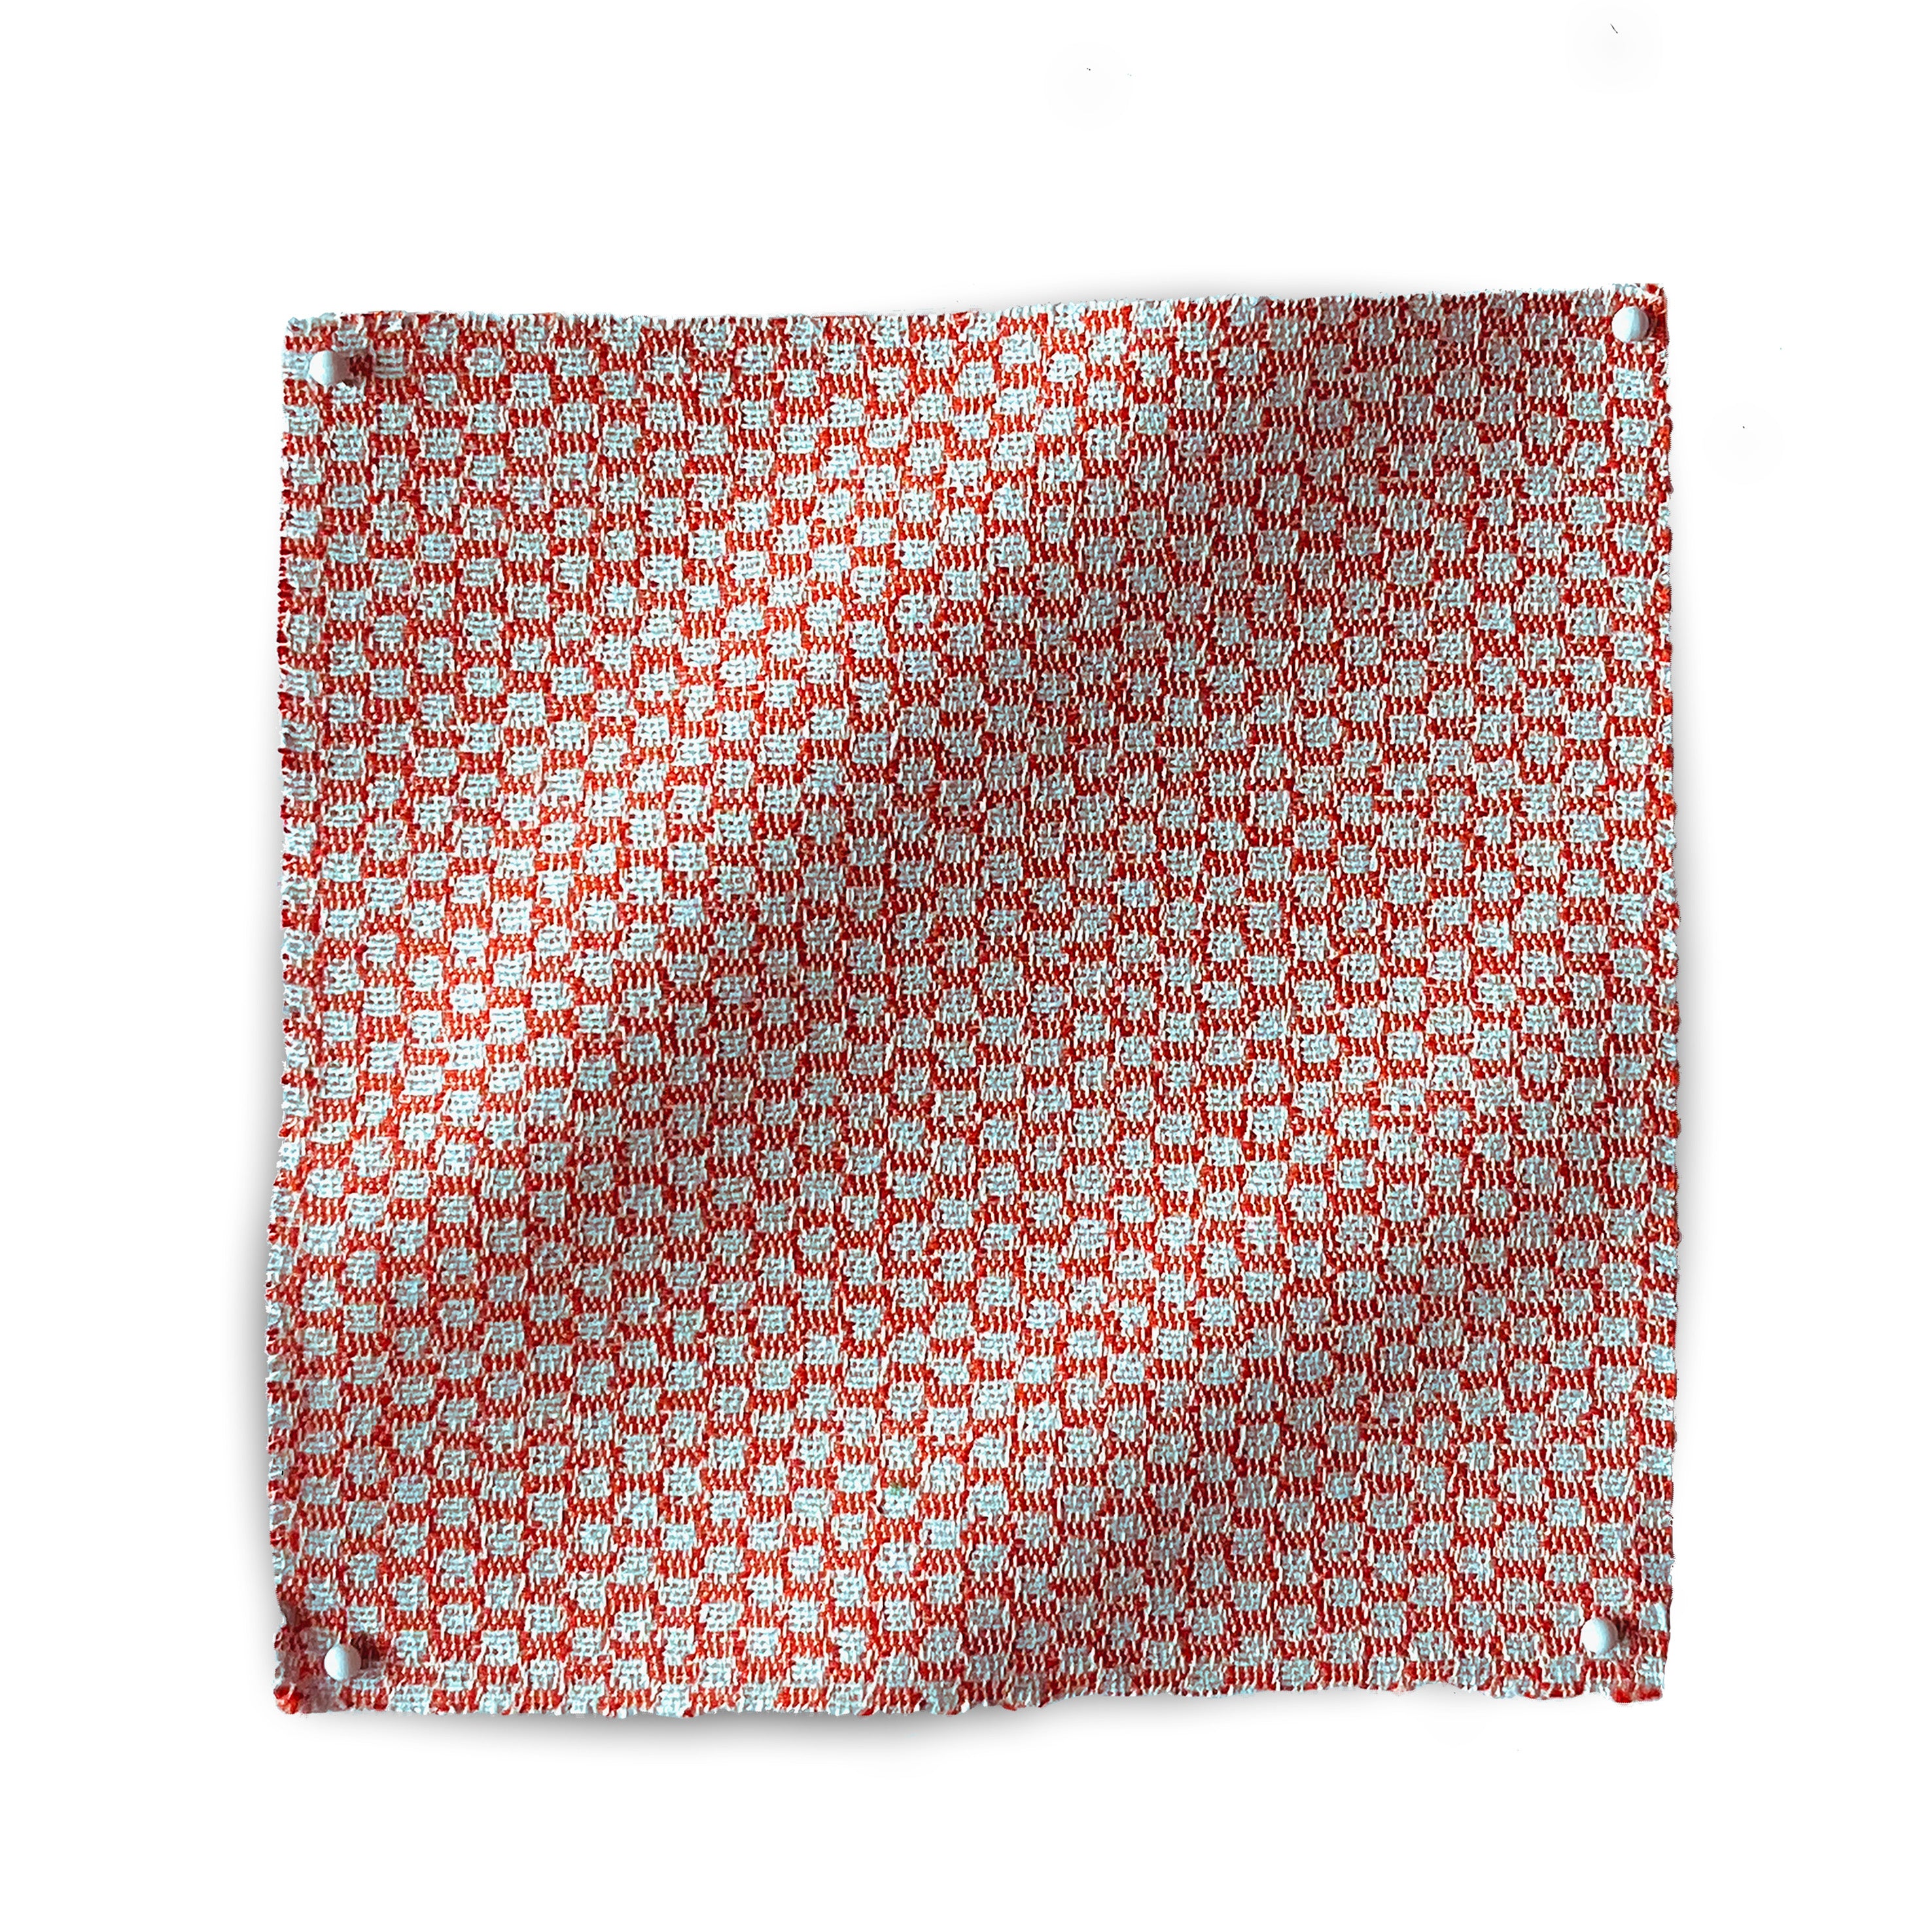 Square fabric swatch in a dense checked weave in red and white.